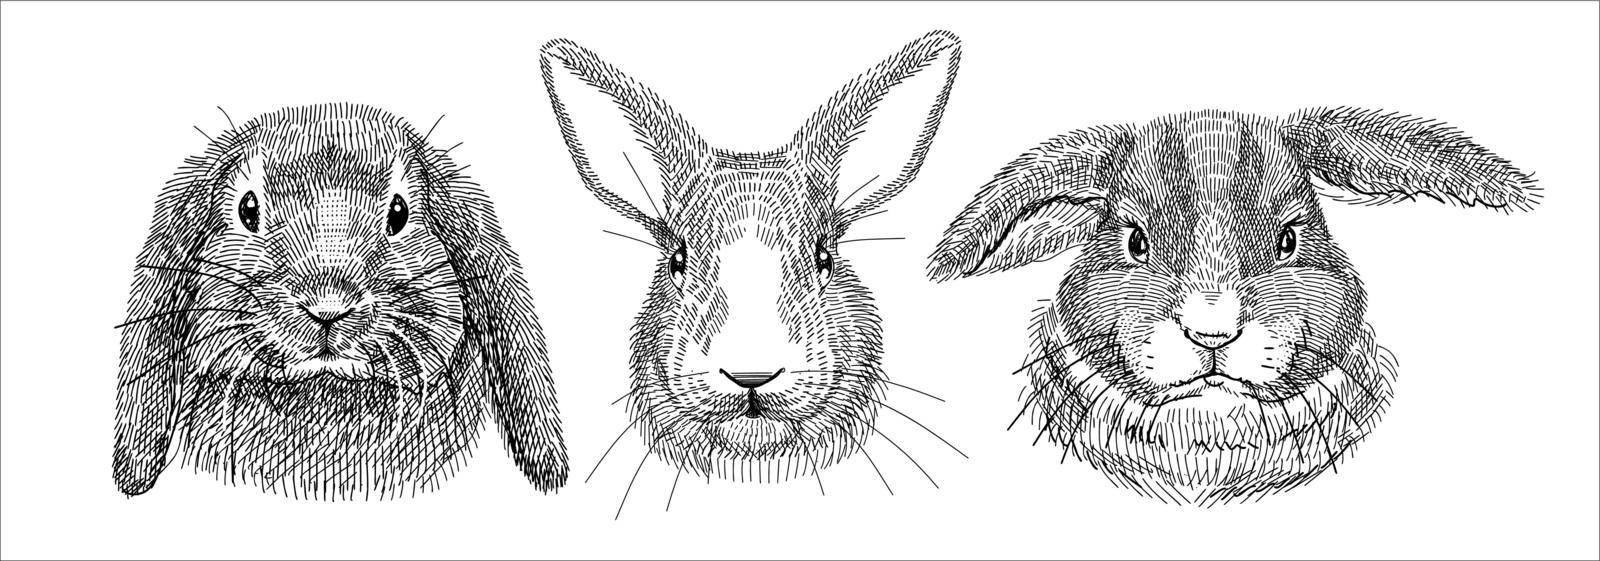 Black and white illustration, sketch drawn with a pen. Set of domestic rabbits, portraits of heads. Vector. Isolated background.